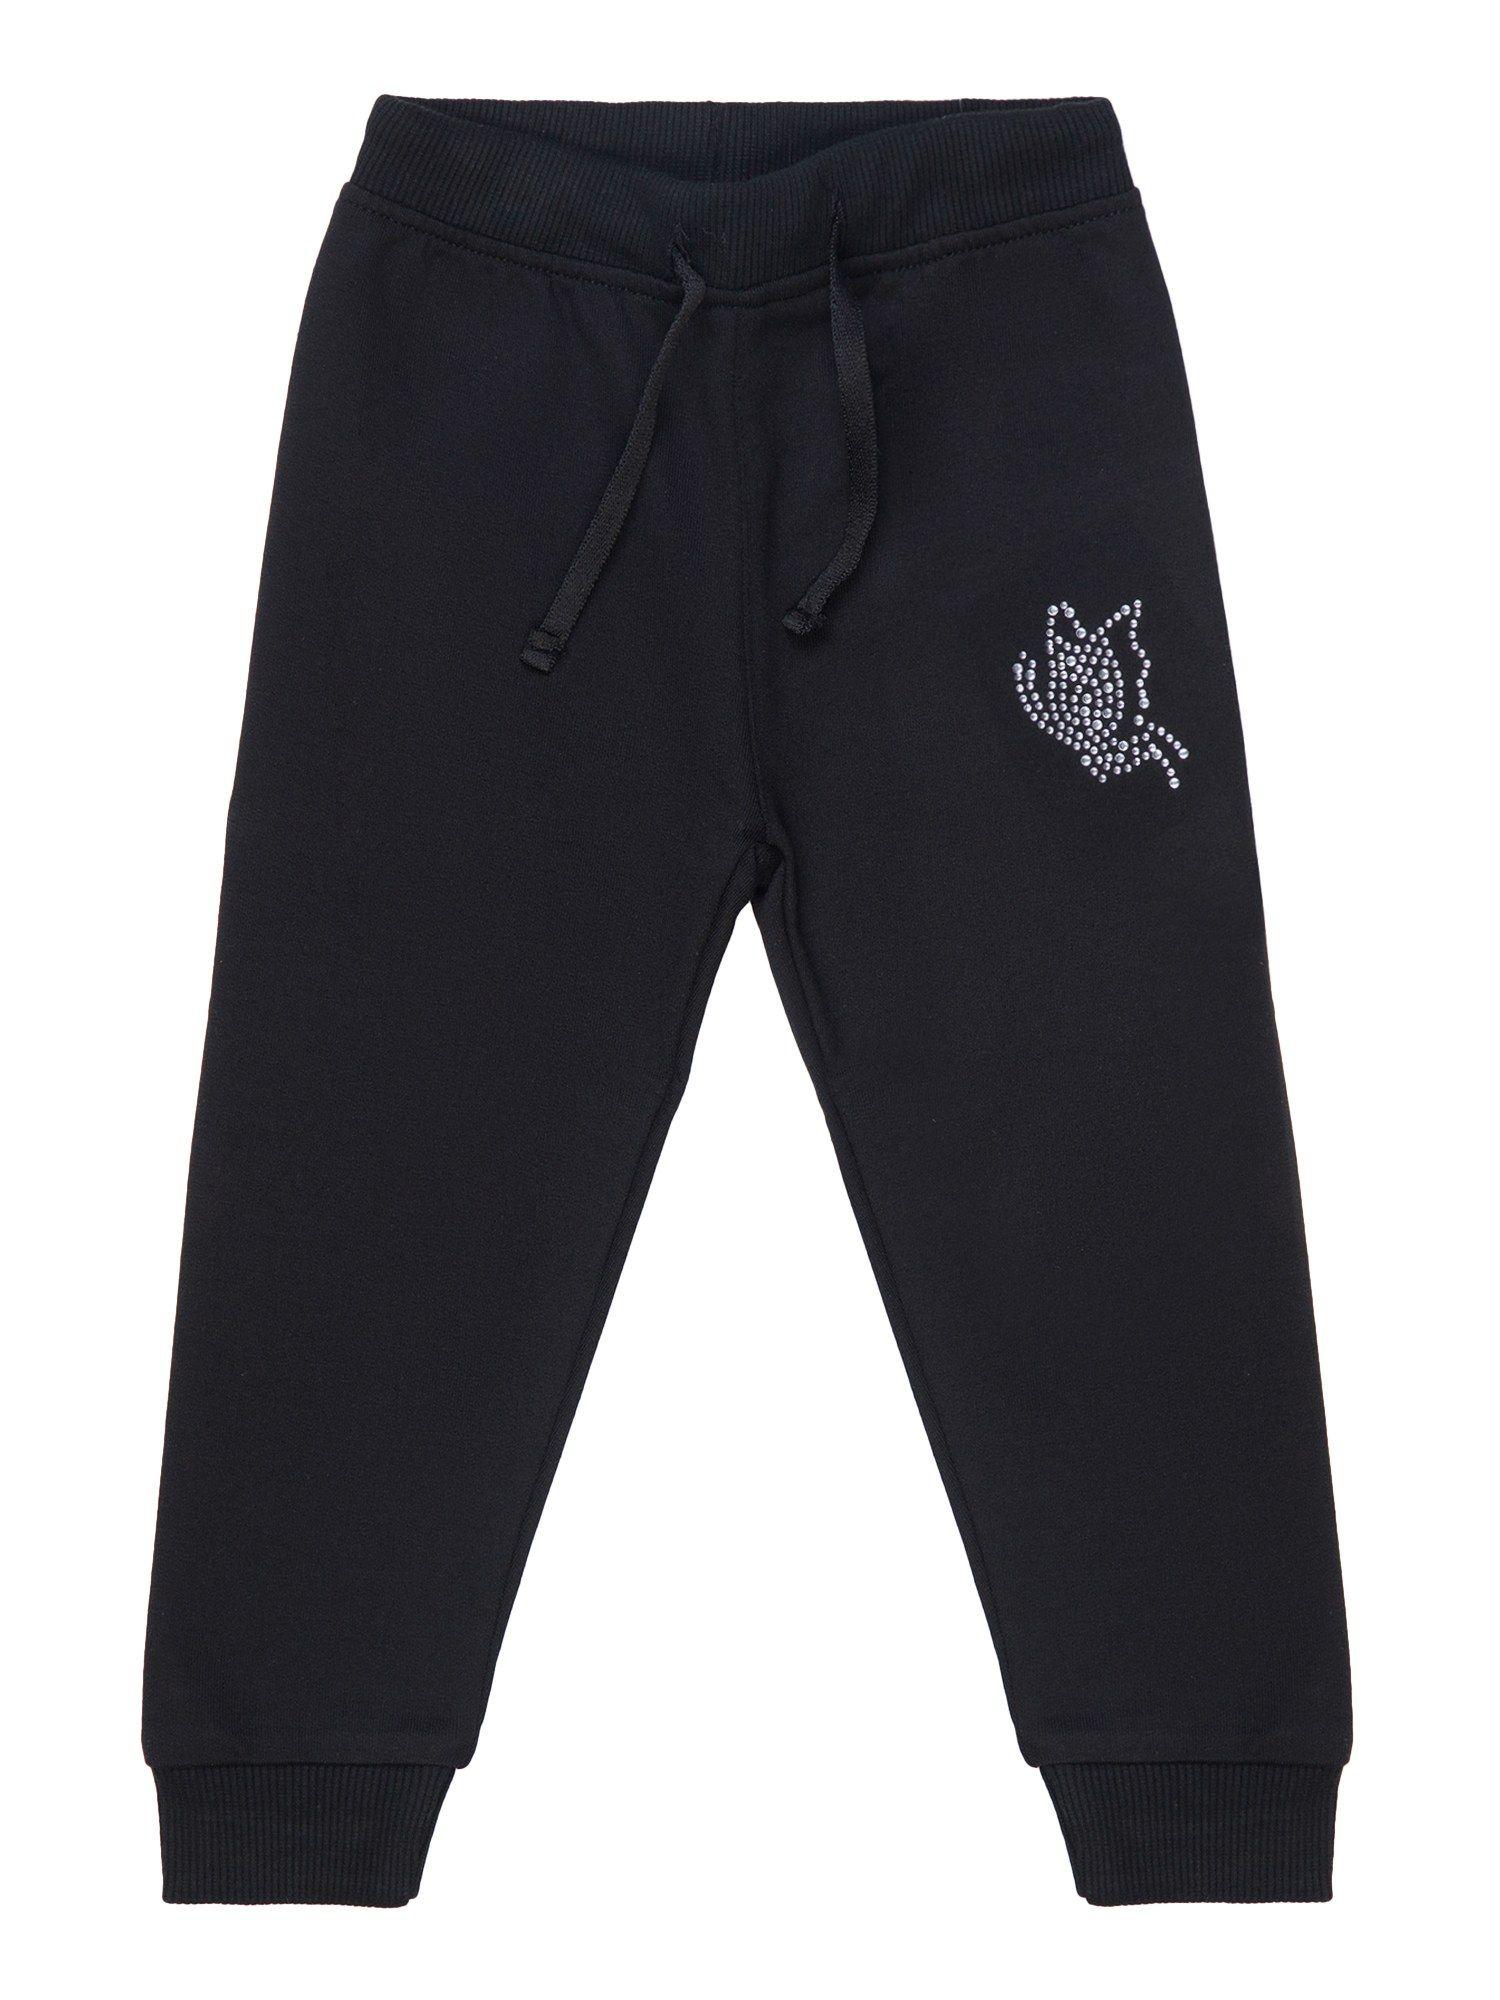 solid black joggers for girls